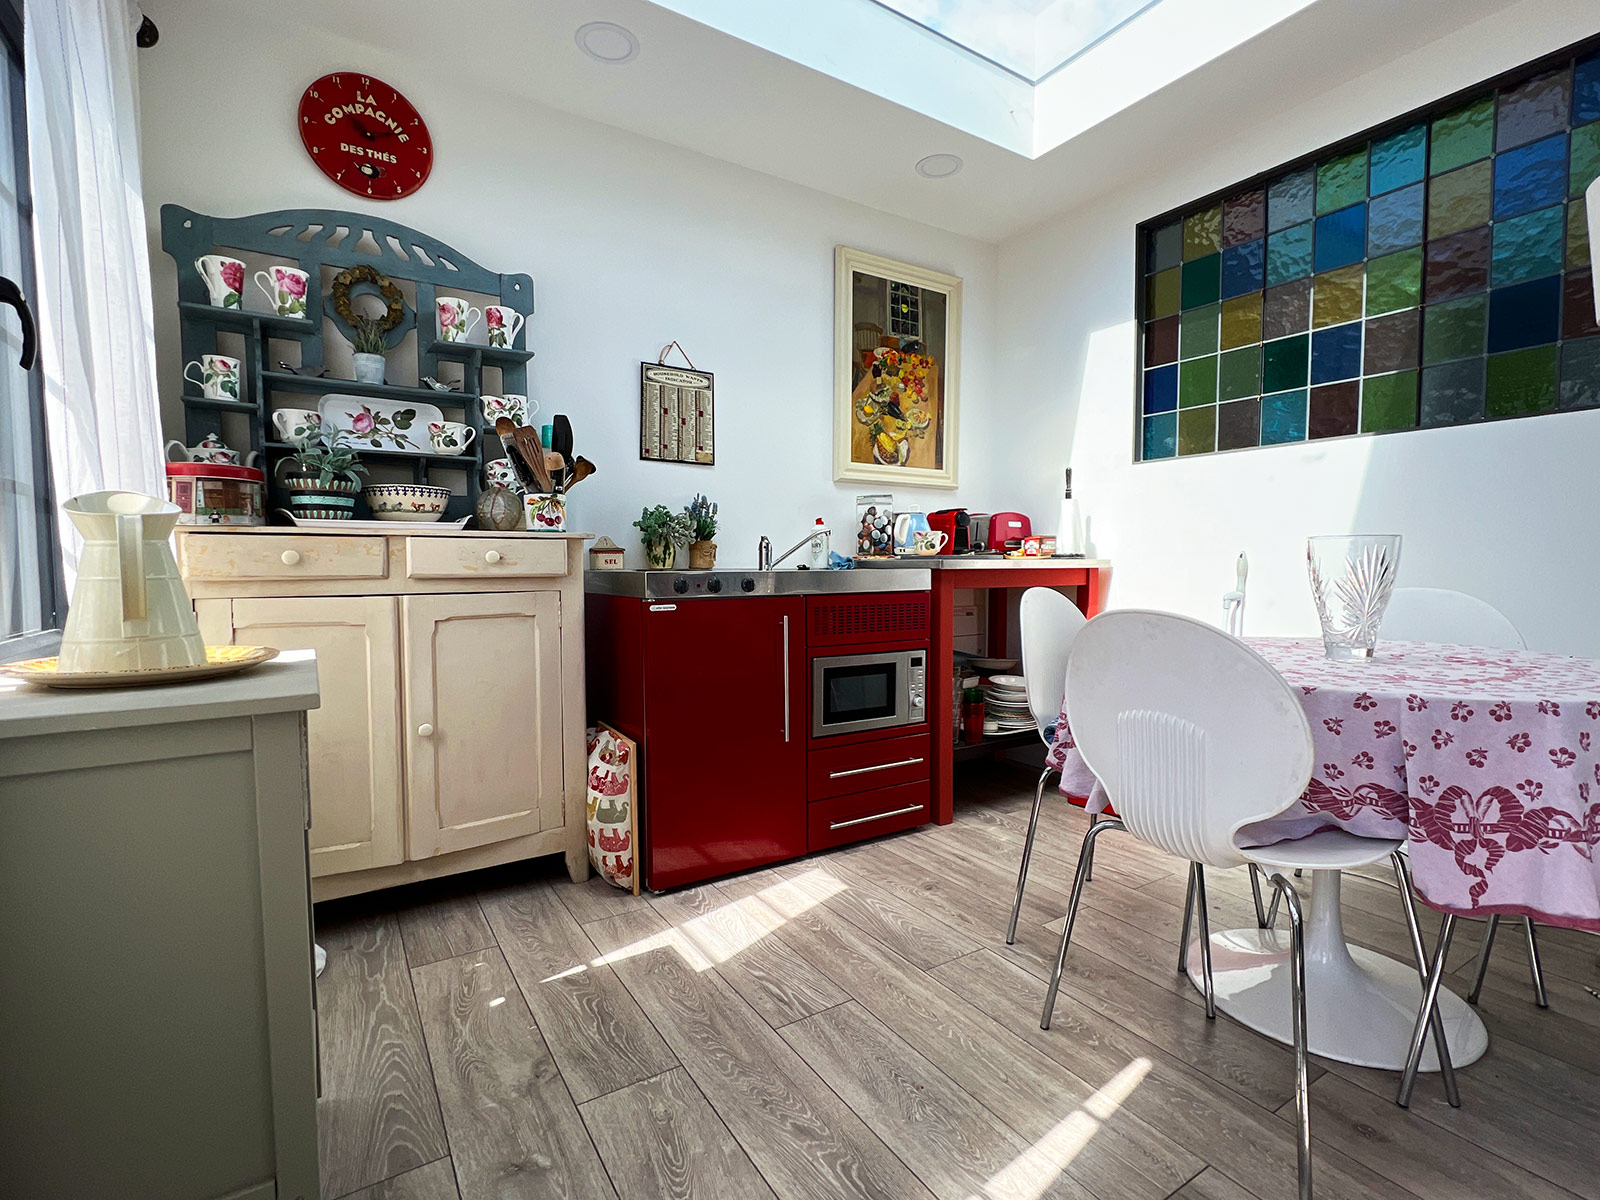 Eclectic kitchen design for bespoke mobile home